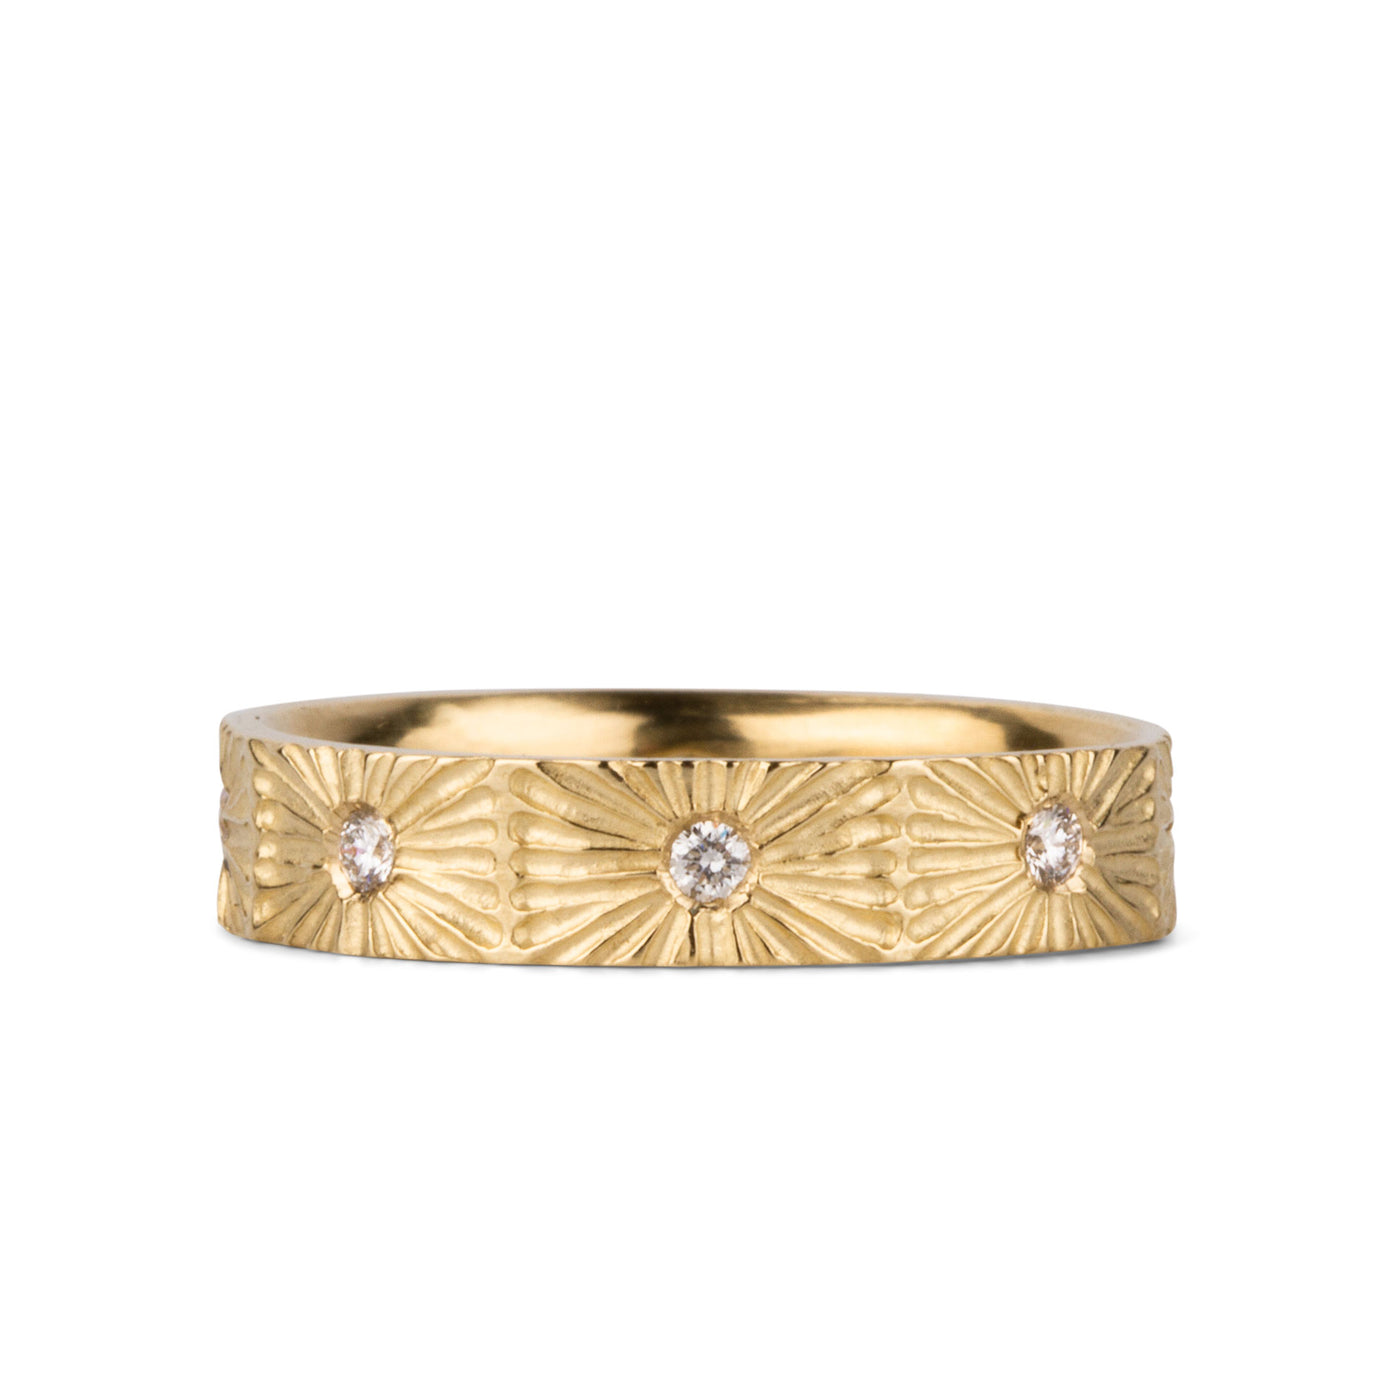 Nova sunburst eternity band with 8 flush set diamonds and carved texture around the outside in 14k yellow gold